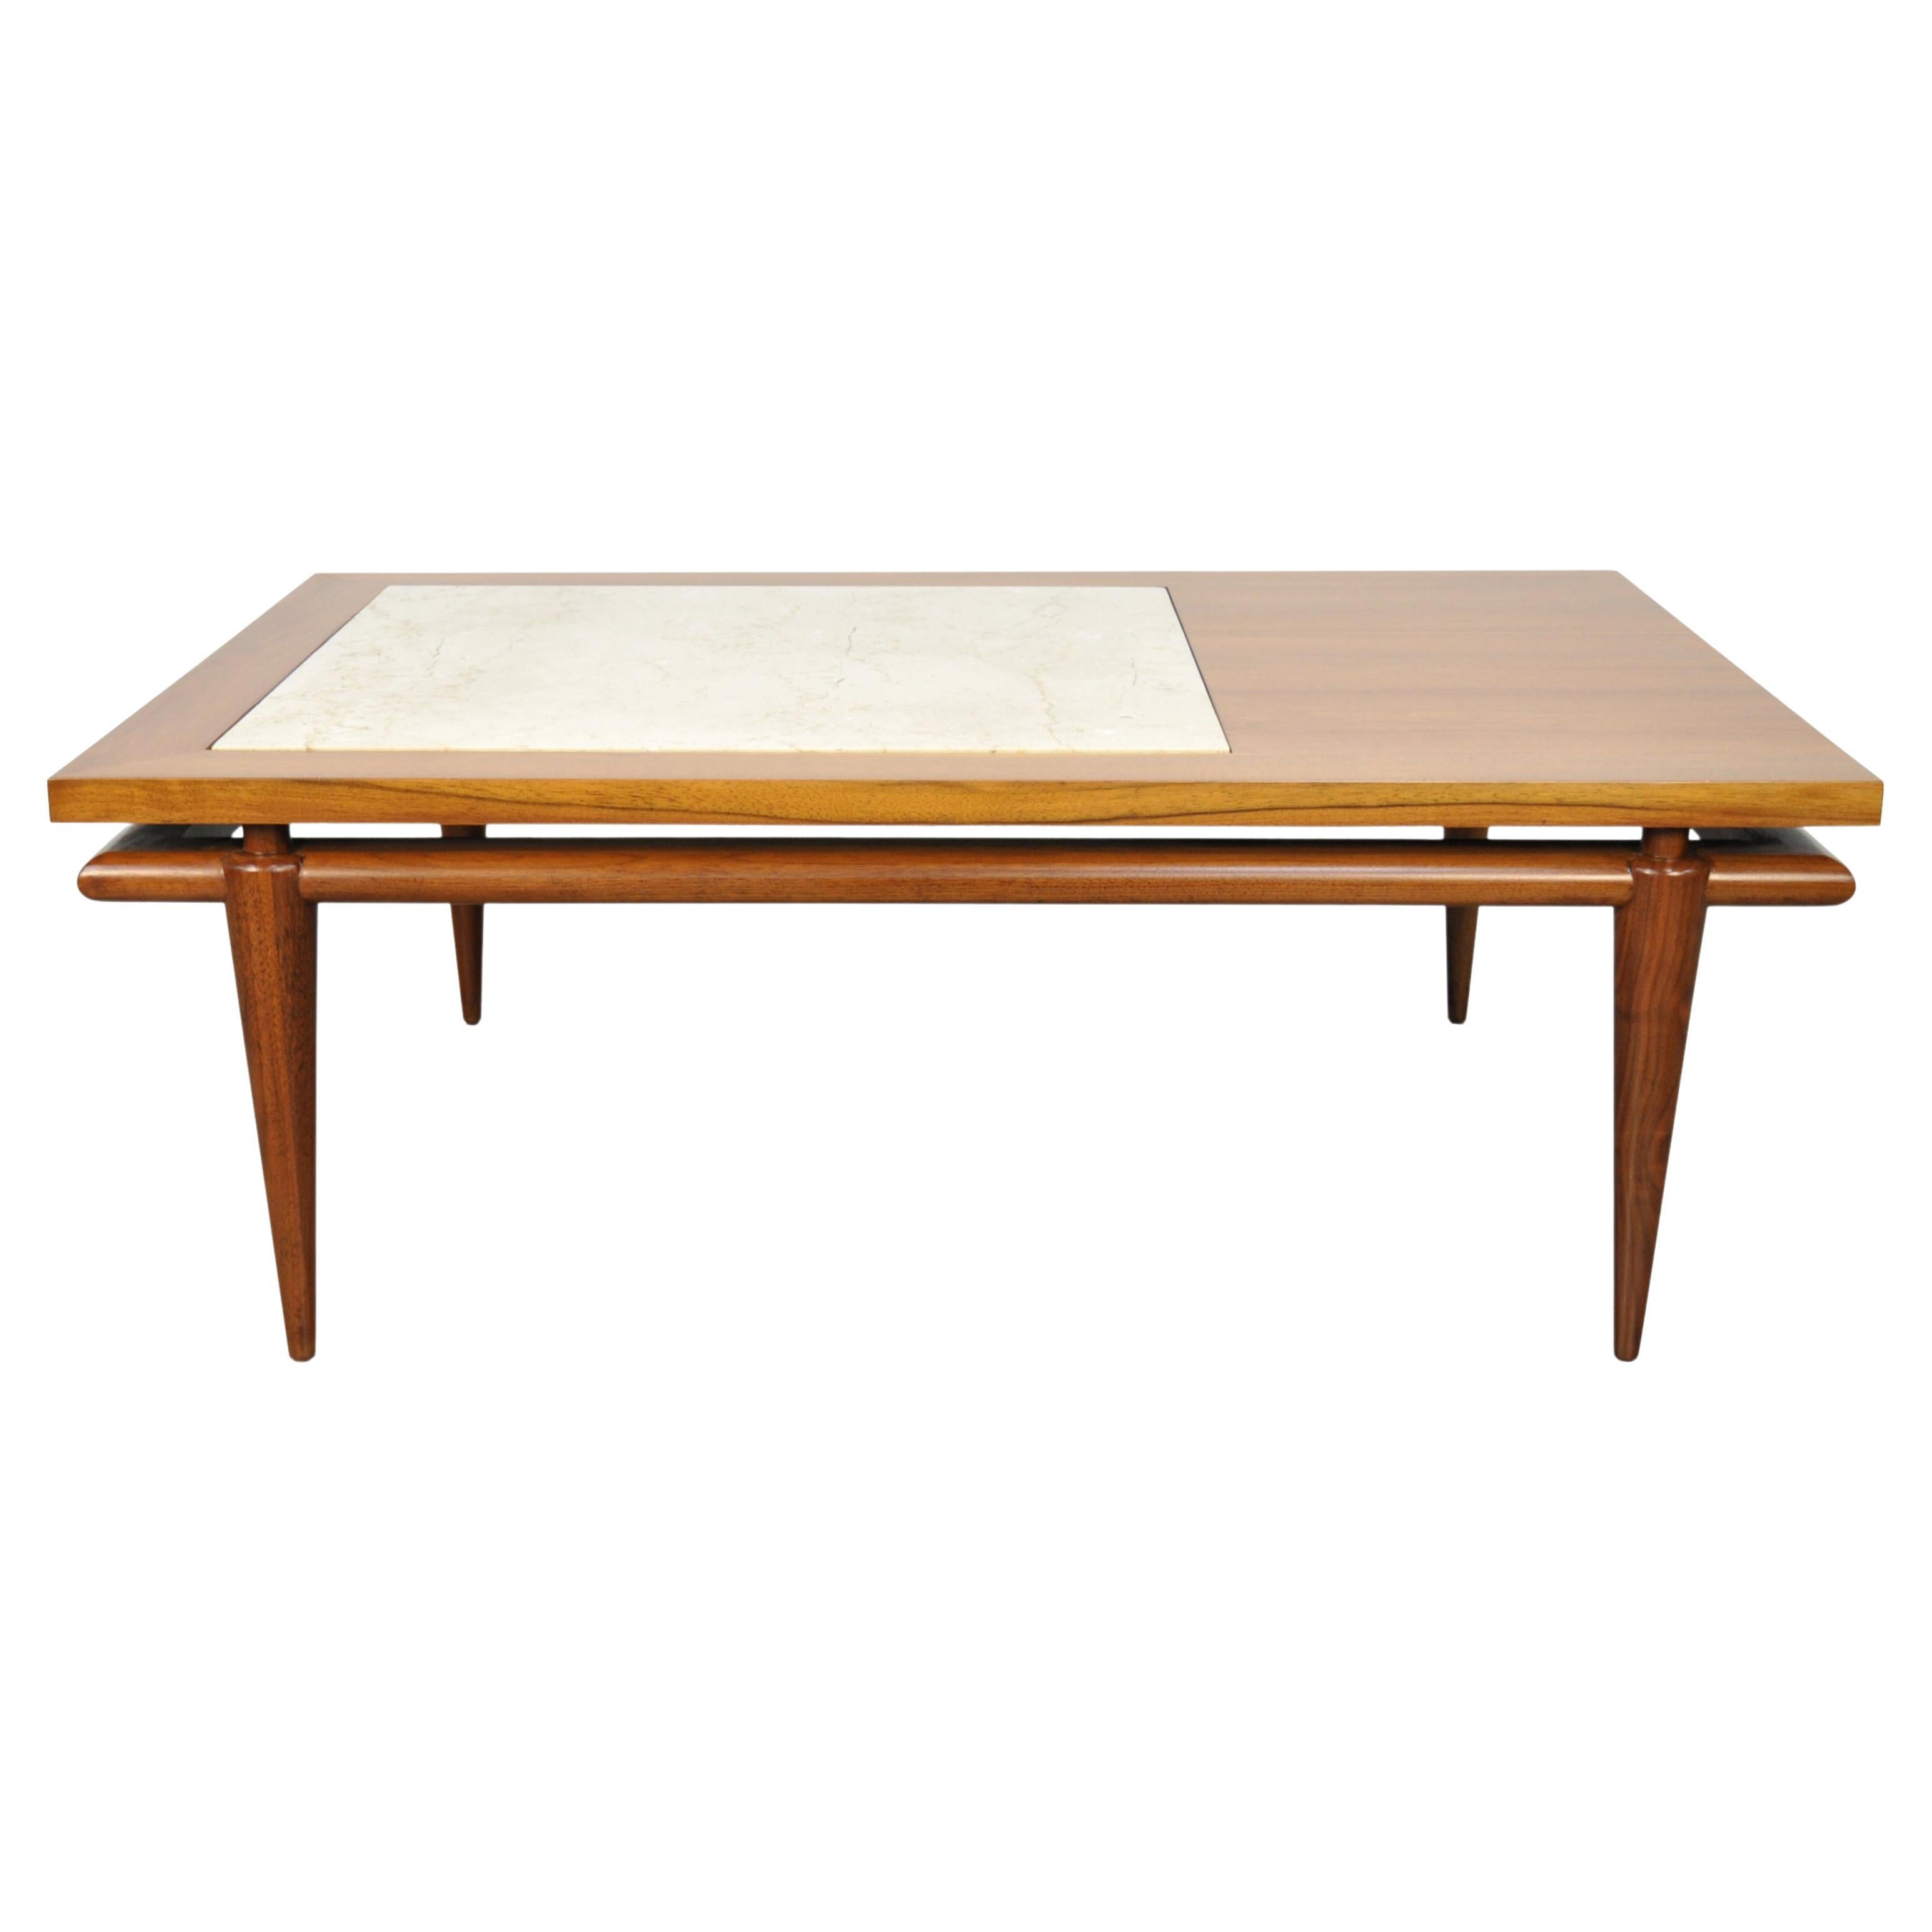 Widdicomb Walnut and Travertine Coffee Table with Floating Top, 1960s